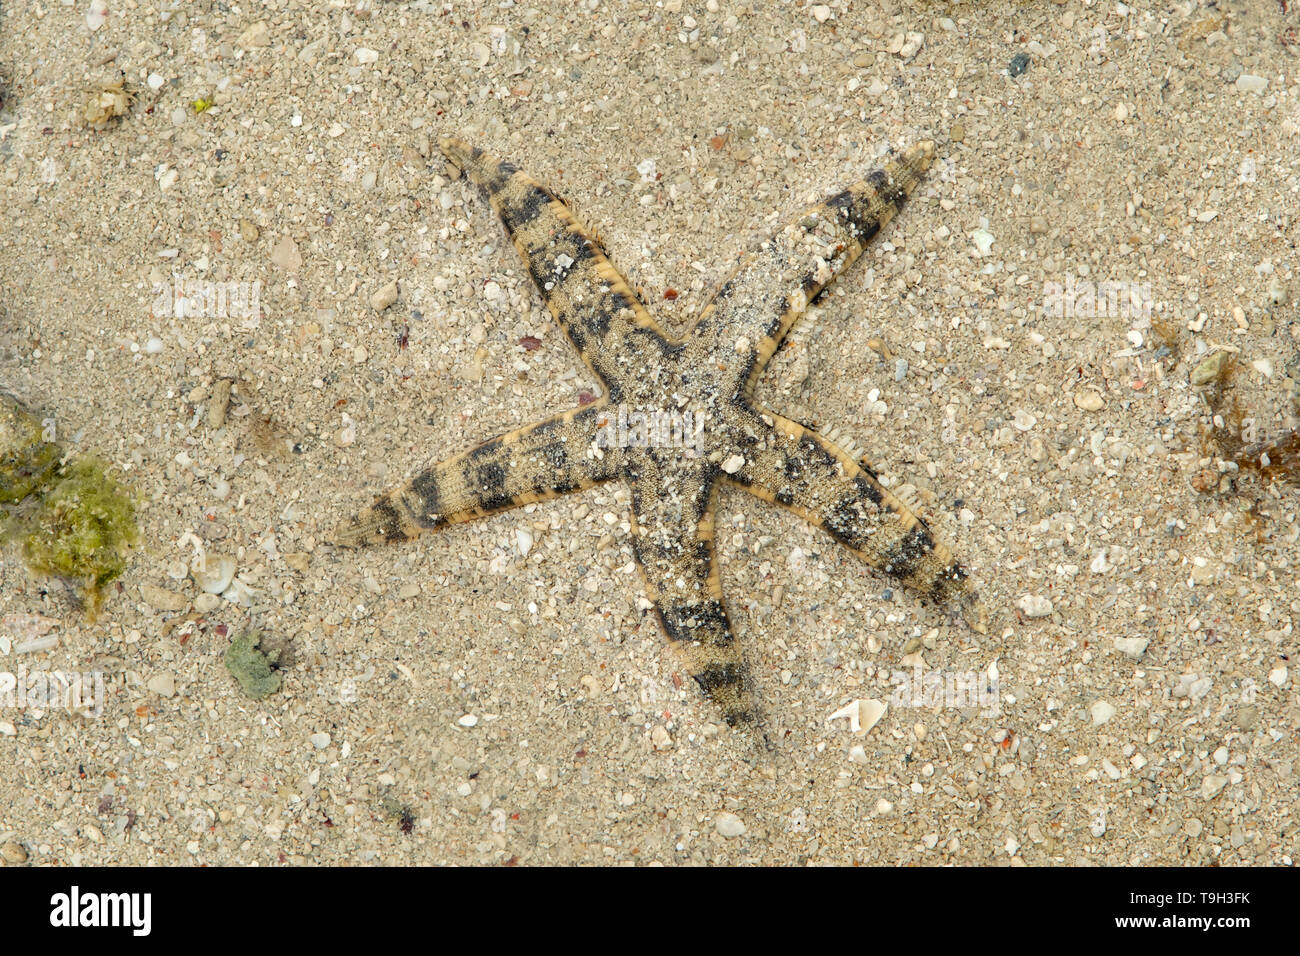 Sea Star, Archaster typicus sur Magra Islet, Far North Queensland Banque D'Images